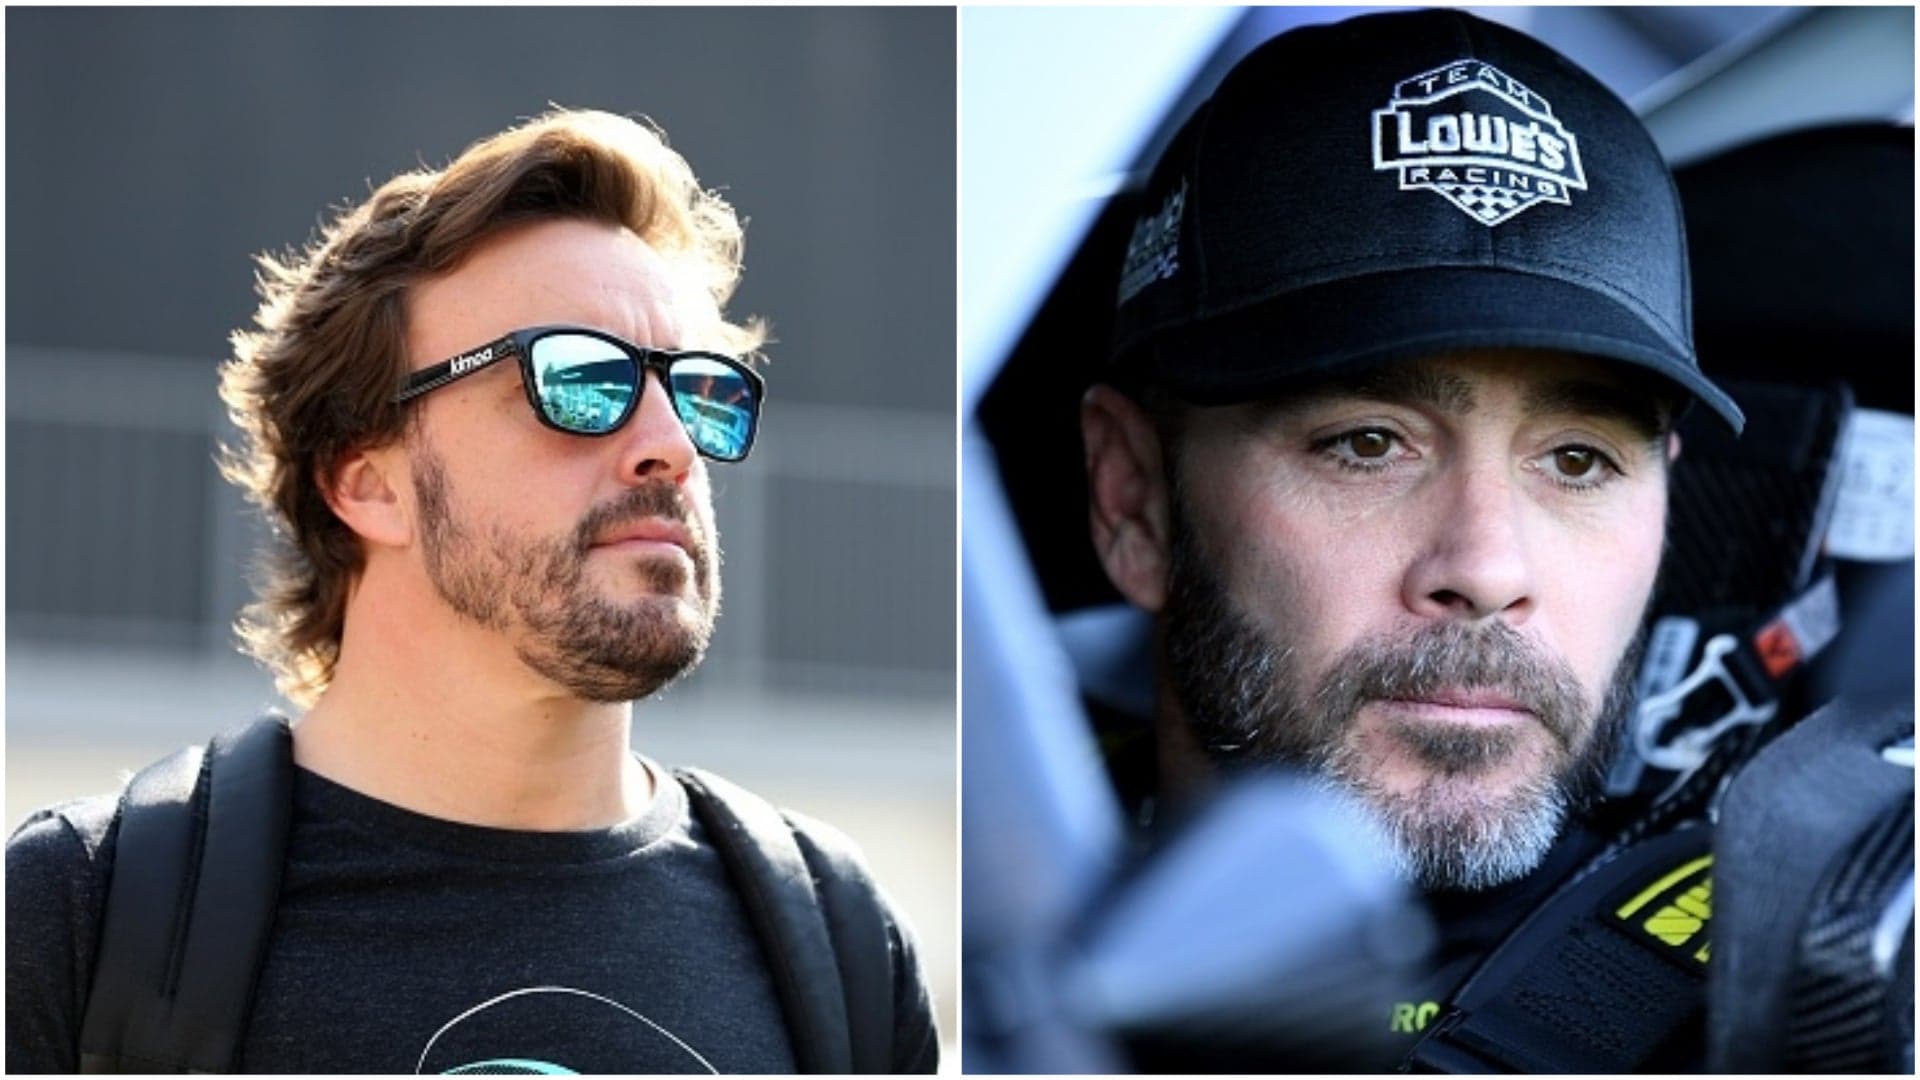 F1 Star Fernando Alonso and NASCAR Champion Jimmie Johnson to Trade Race Cars in Bahrain Swap Test